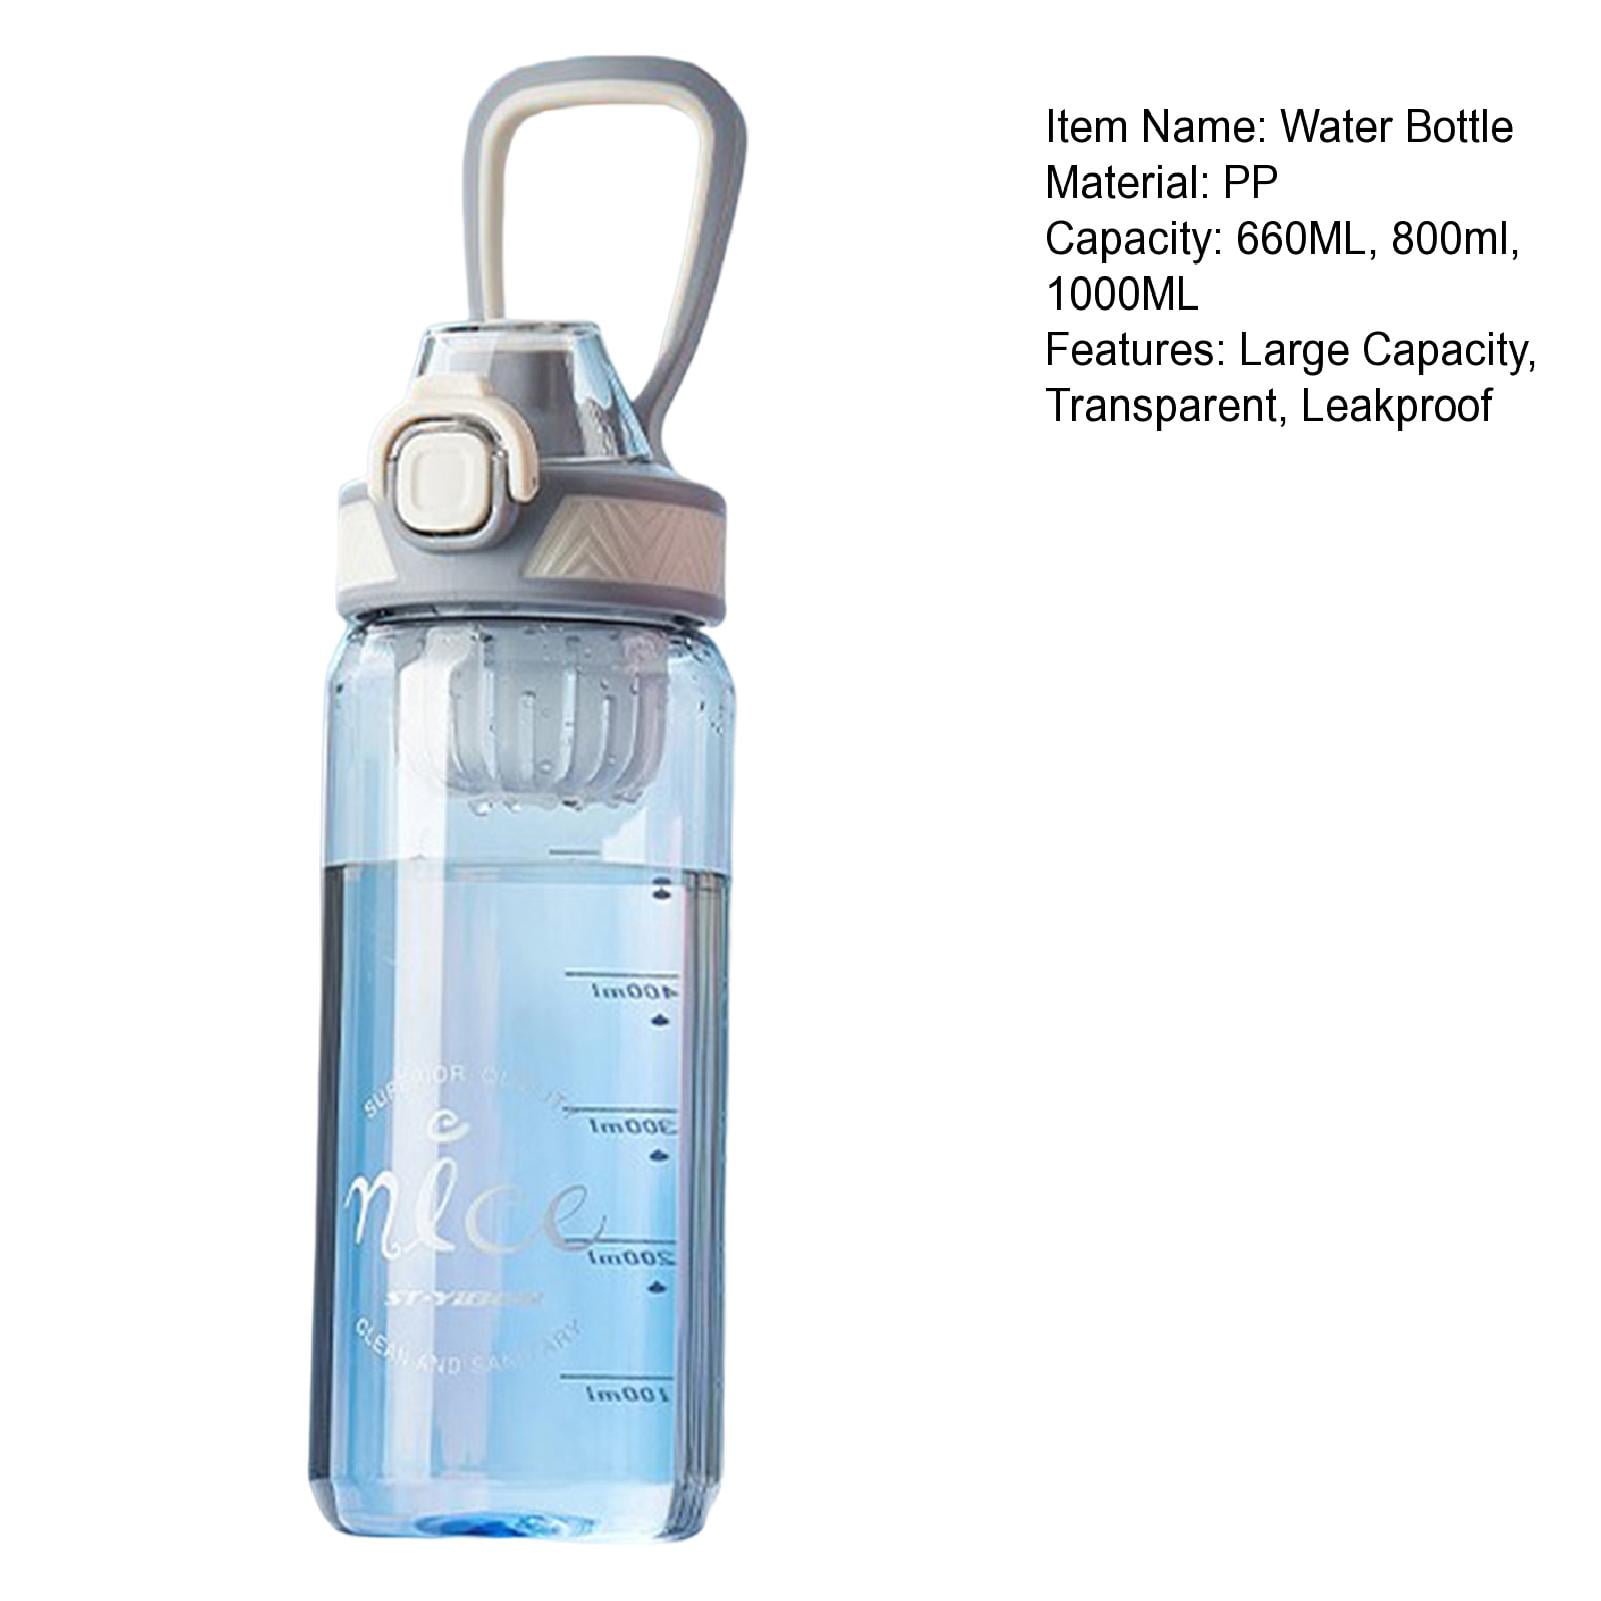 Hesroicy 660ML/800ML/1000ML Sports Water Bottle Leakproof High Temperature  Resistant Large Capacity Clear Scale Transparent Fitness Water Bottle with